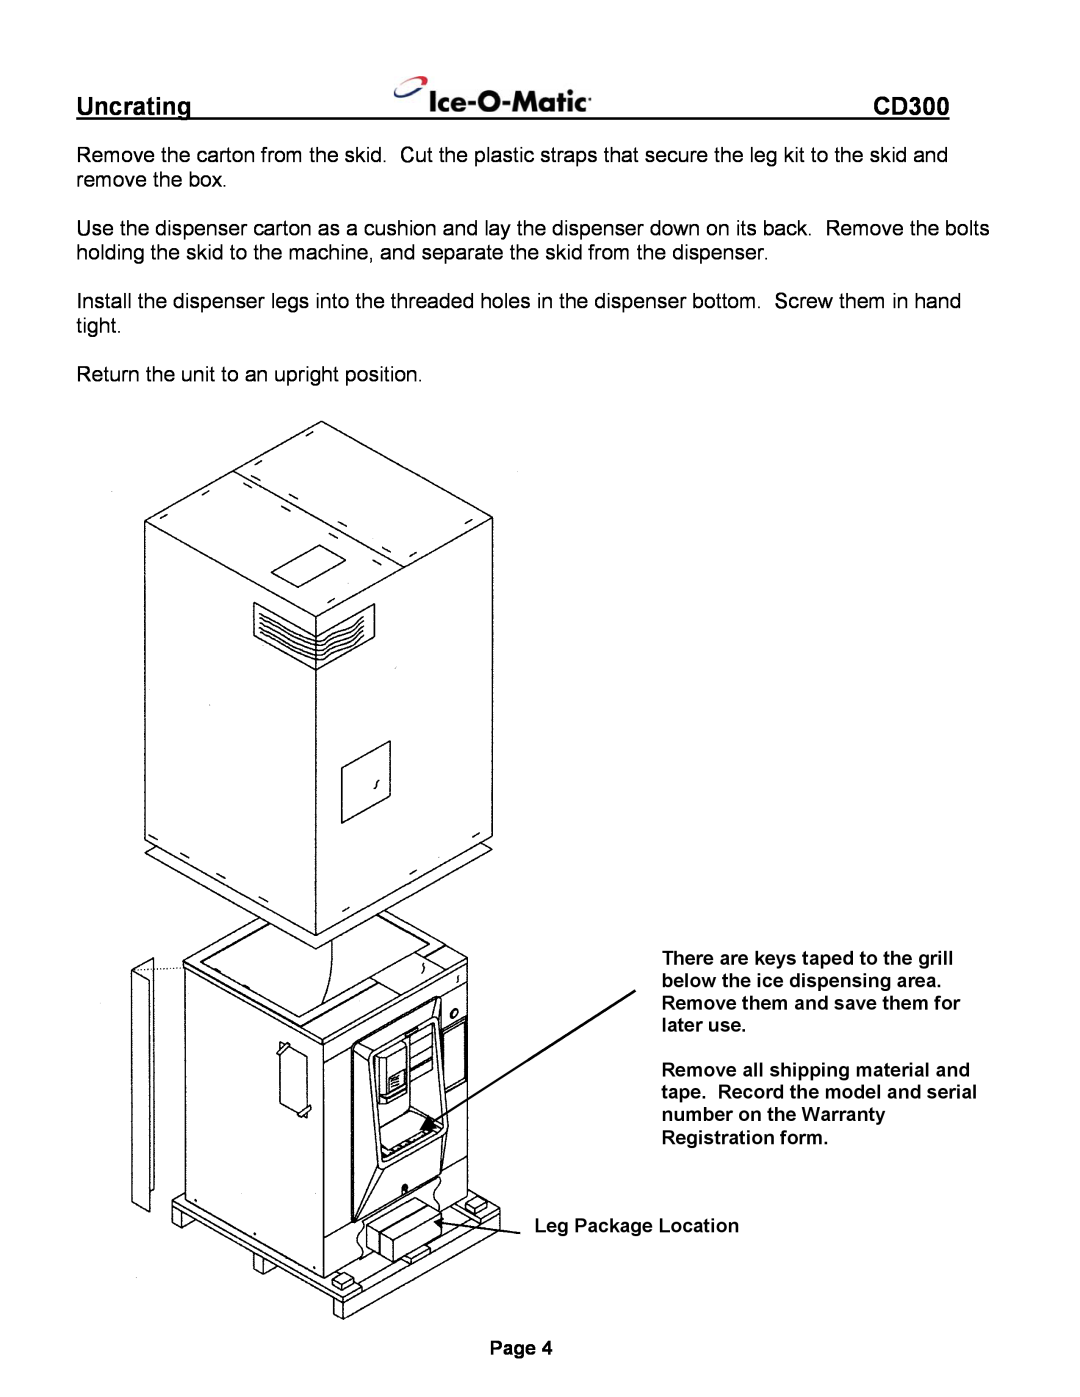 Ice-O-Matic CD300 installation manual Uncrating 